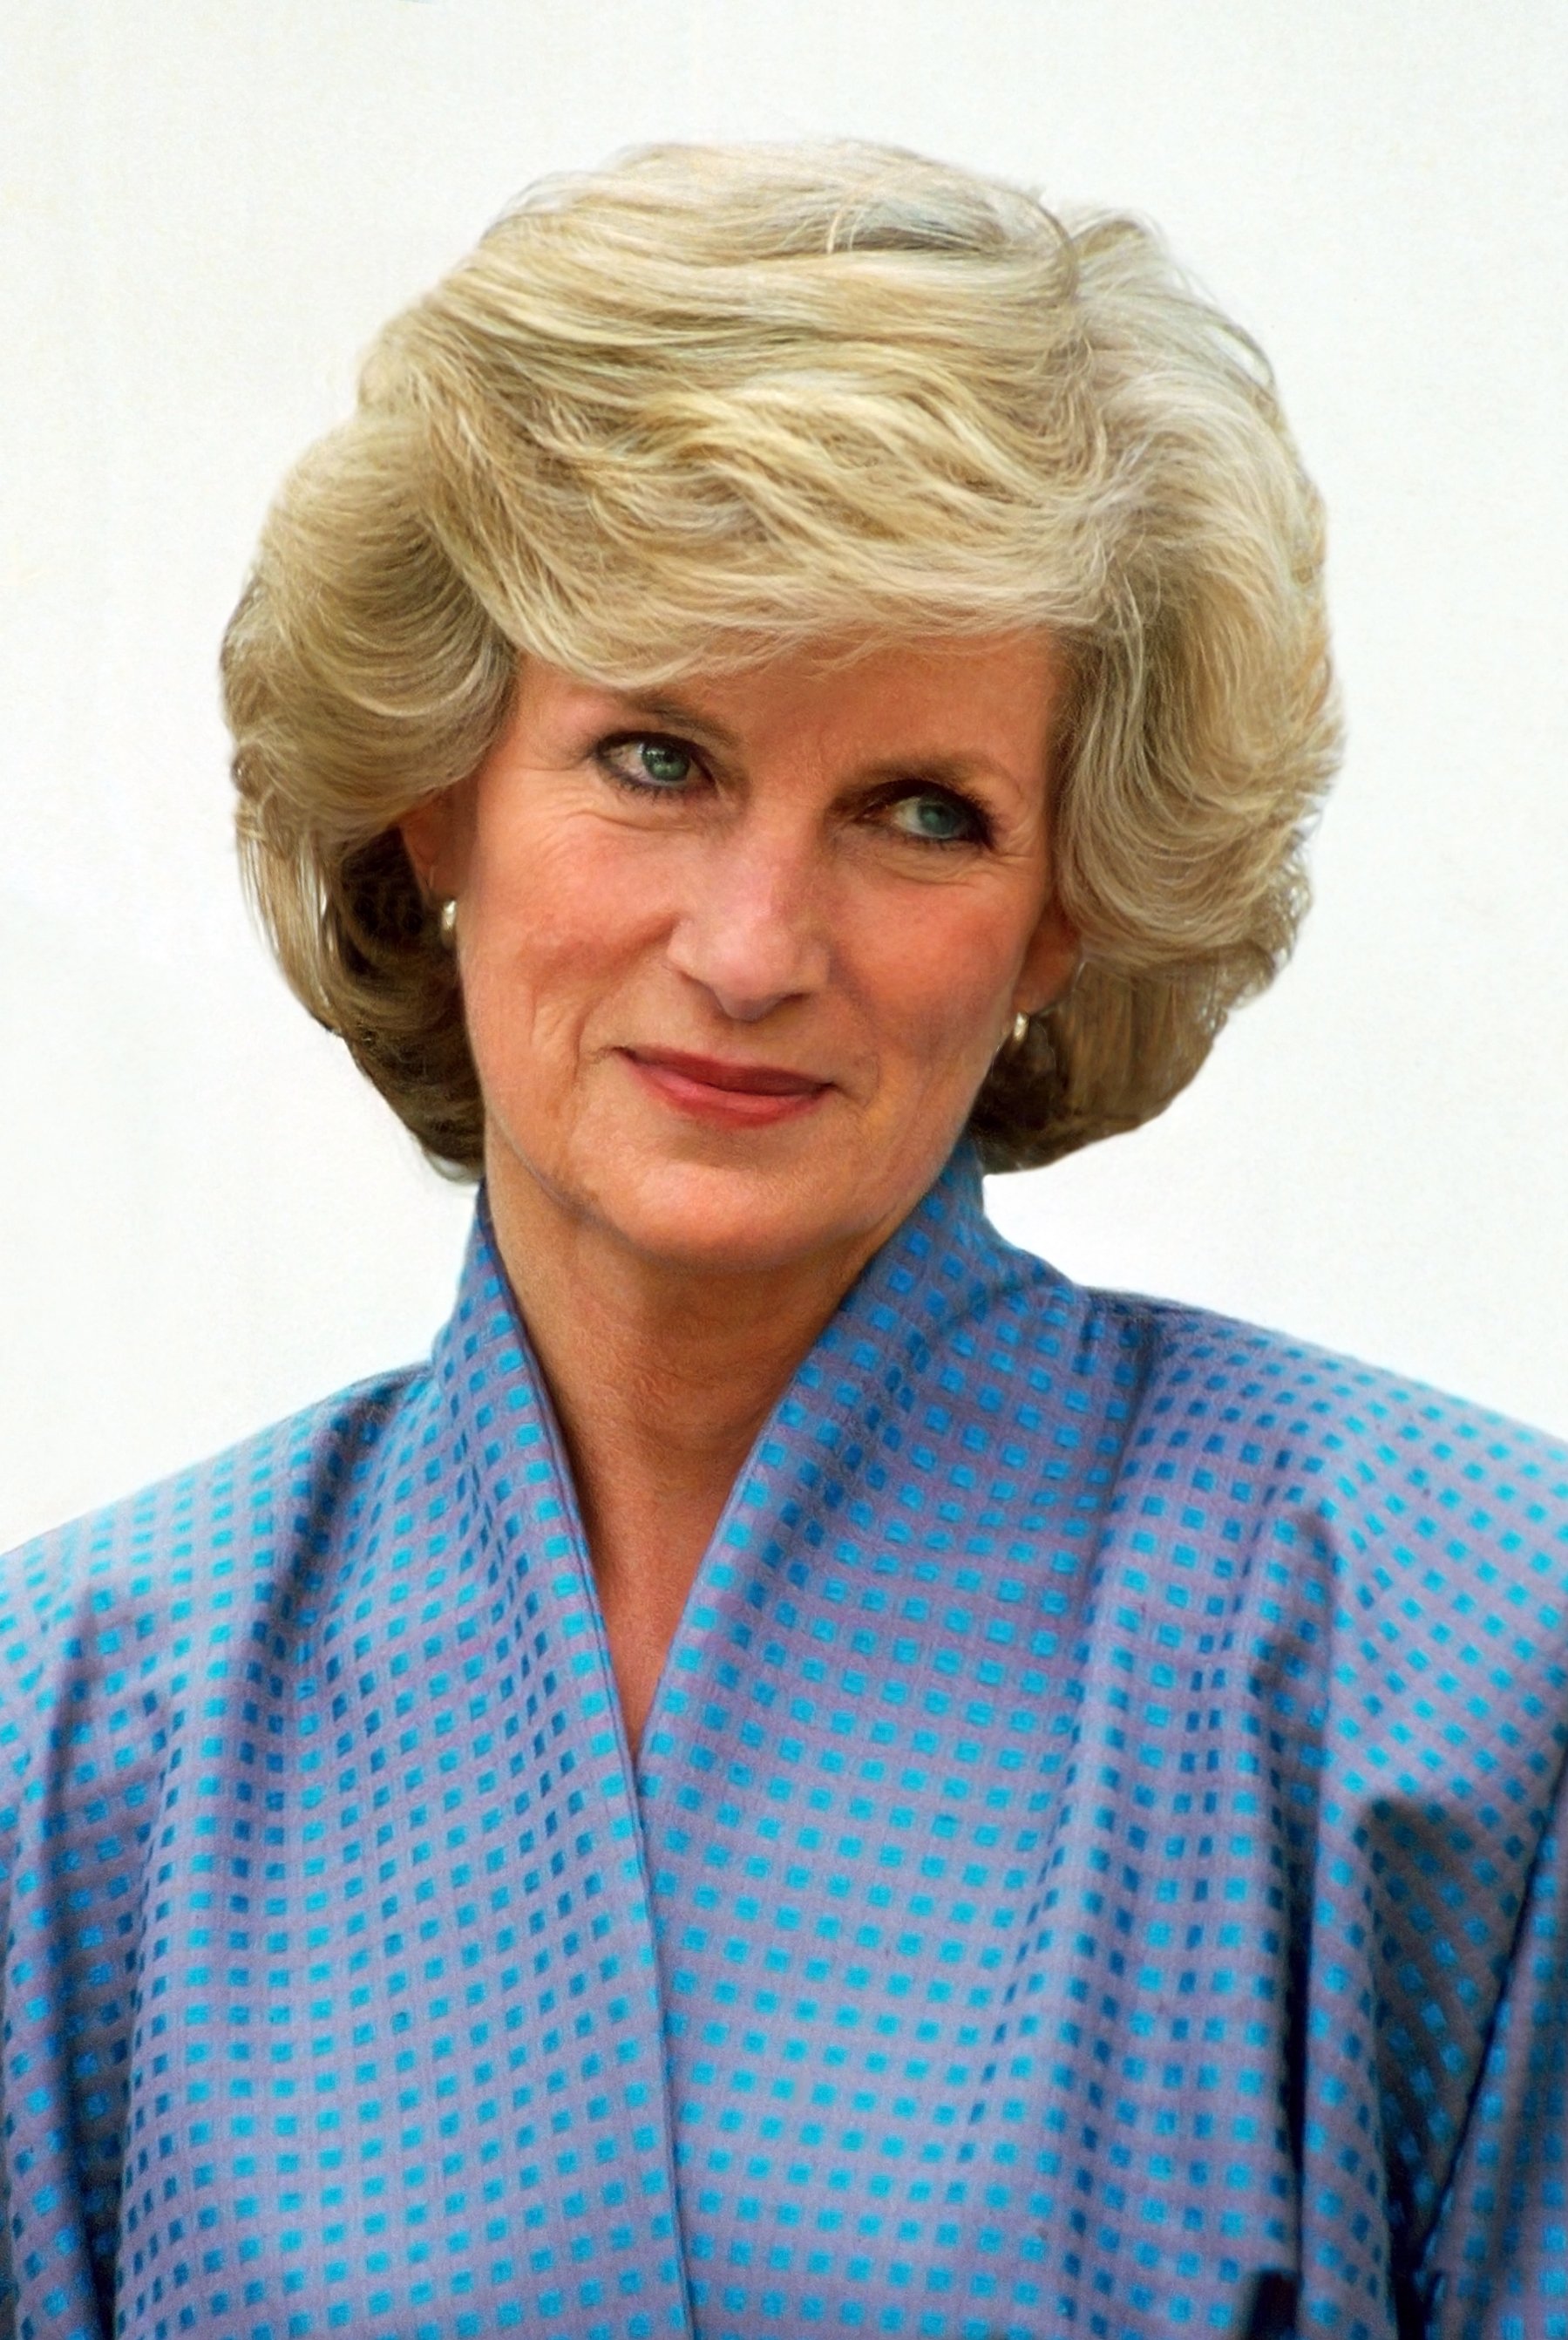 How Princess Diana Might Look Today as She Would Have Turned 59 This Year